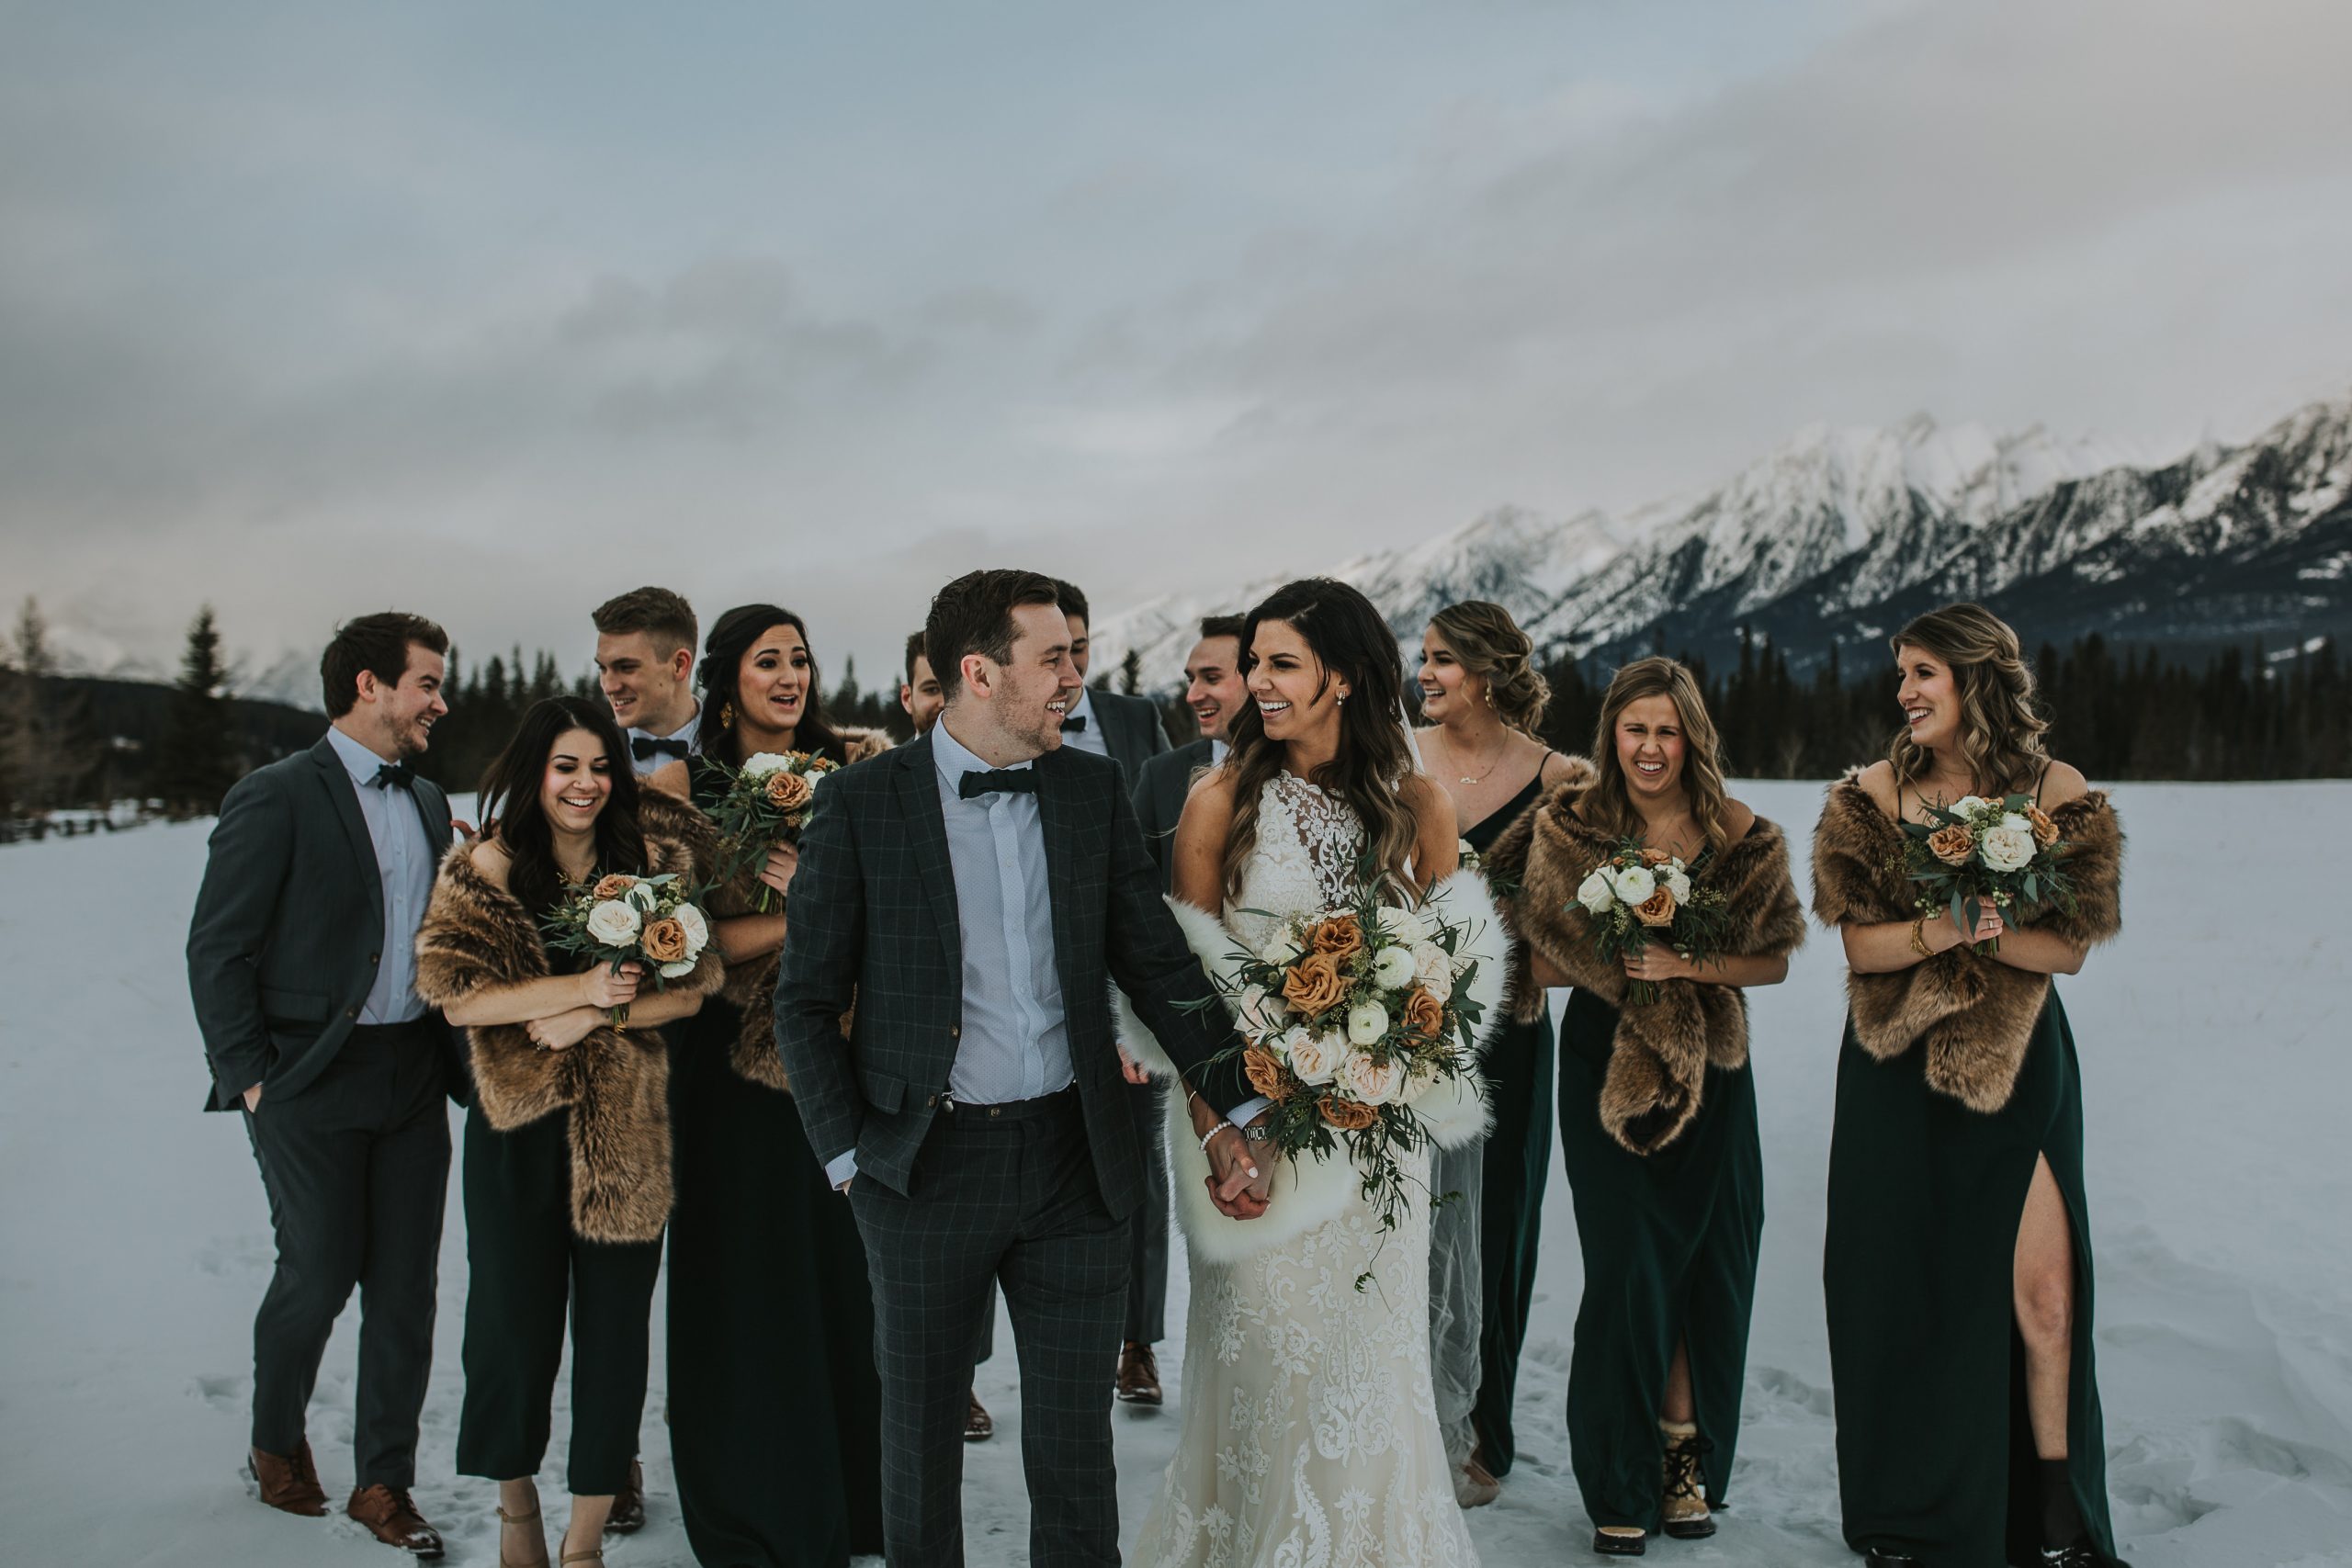 Bride Wearing Halter Neck Wedding Dress by Sottero and Midgley Walking with Groom in the Snowy Mountains Walking Through Arch Made by Wedding Party